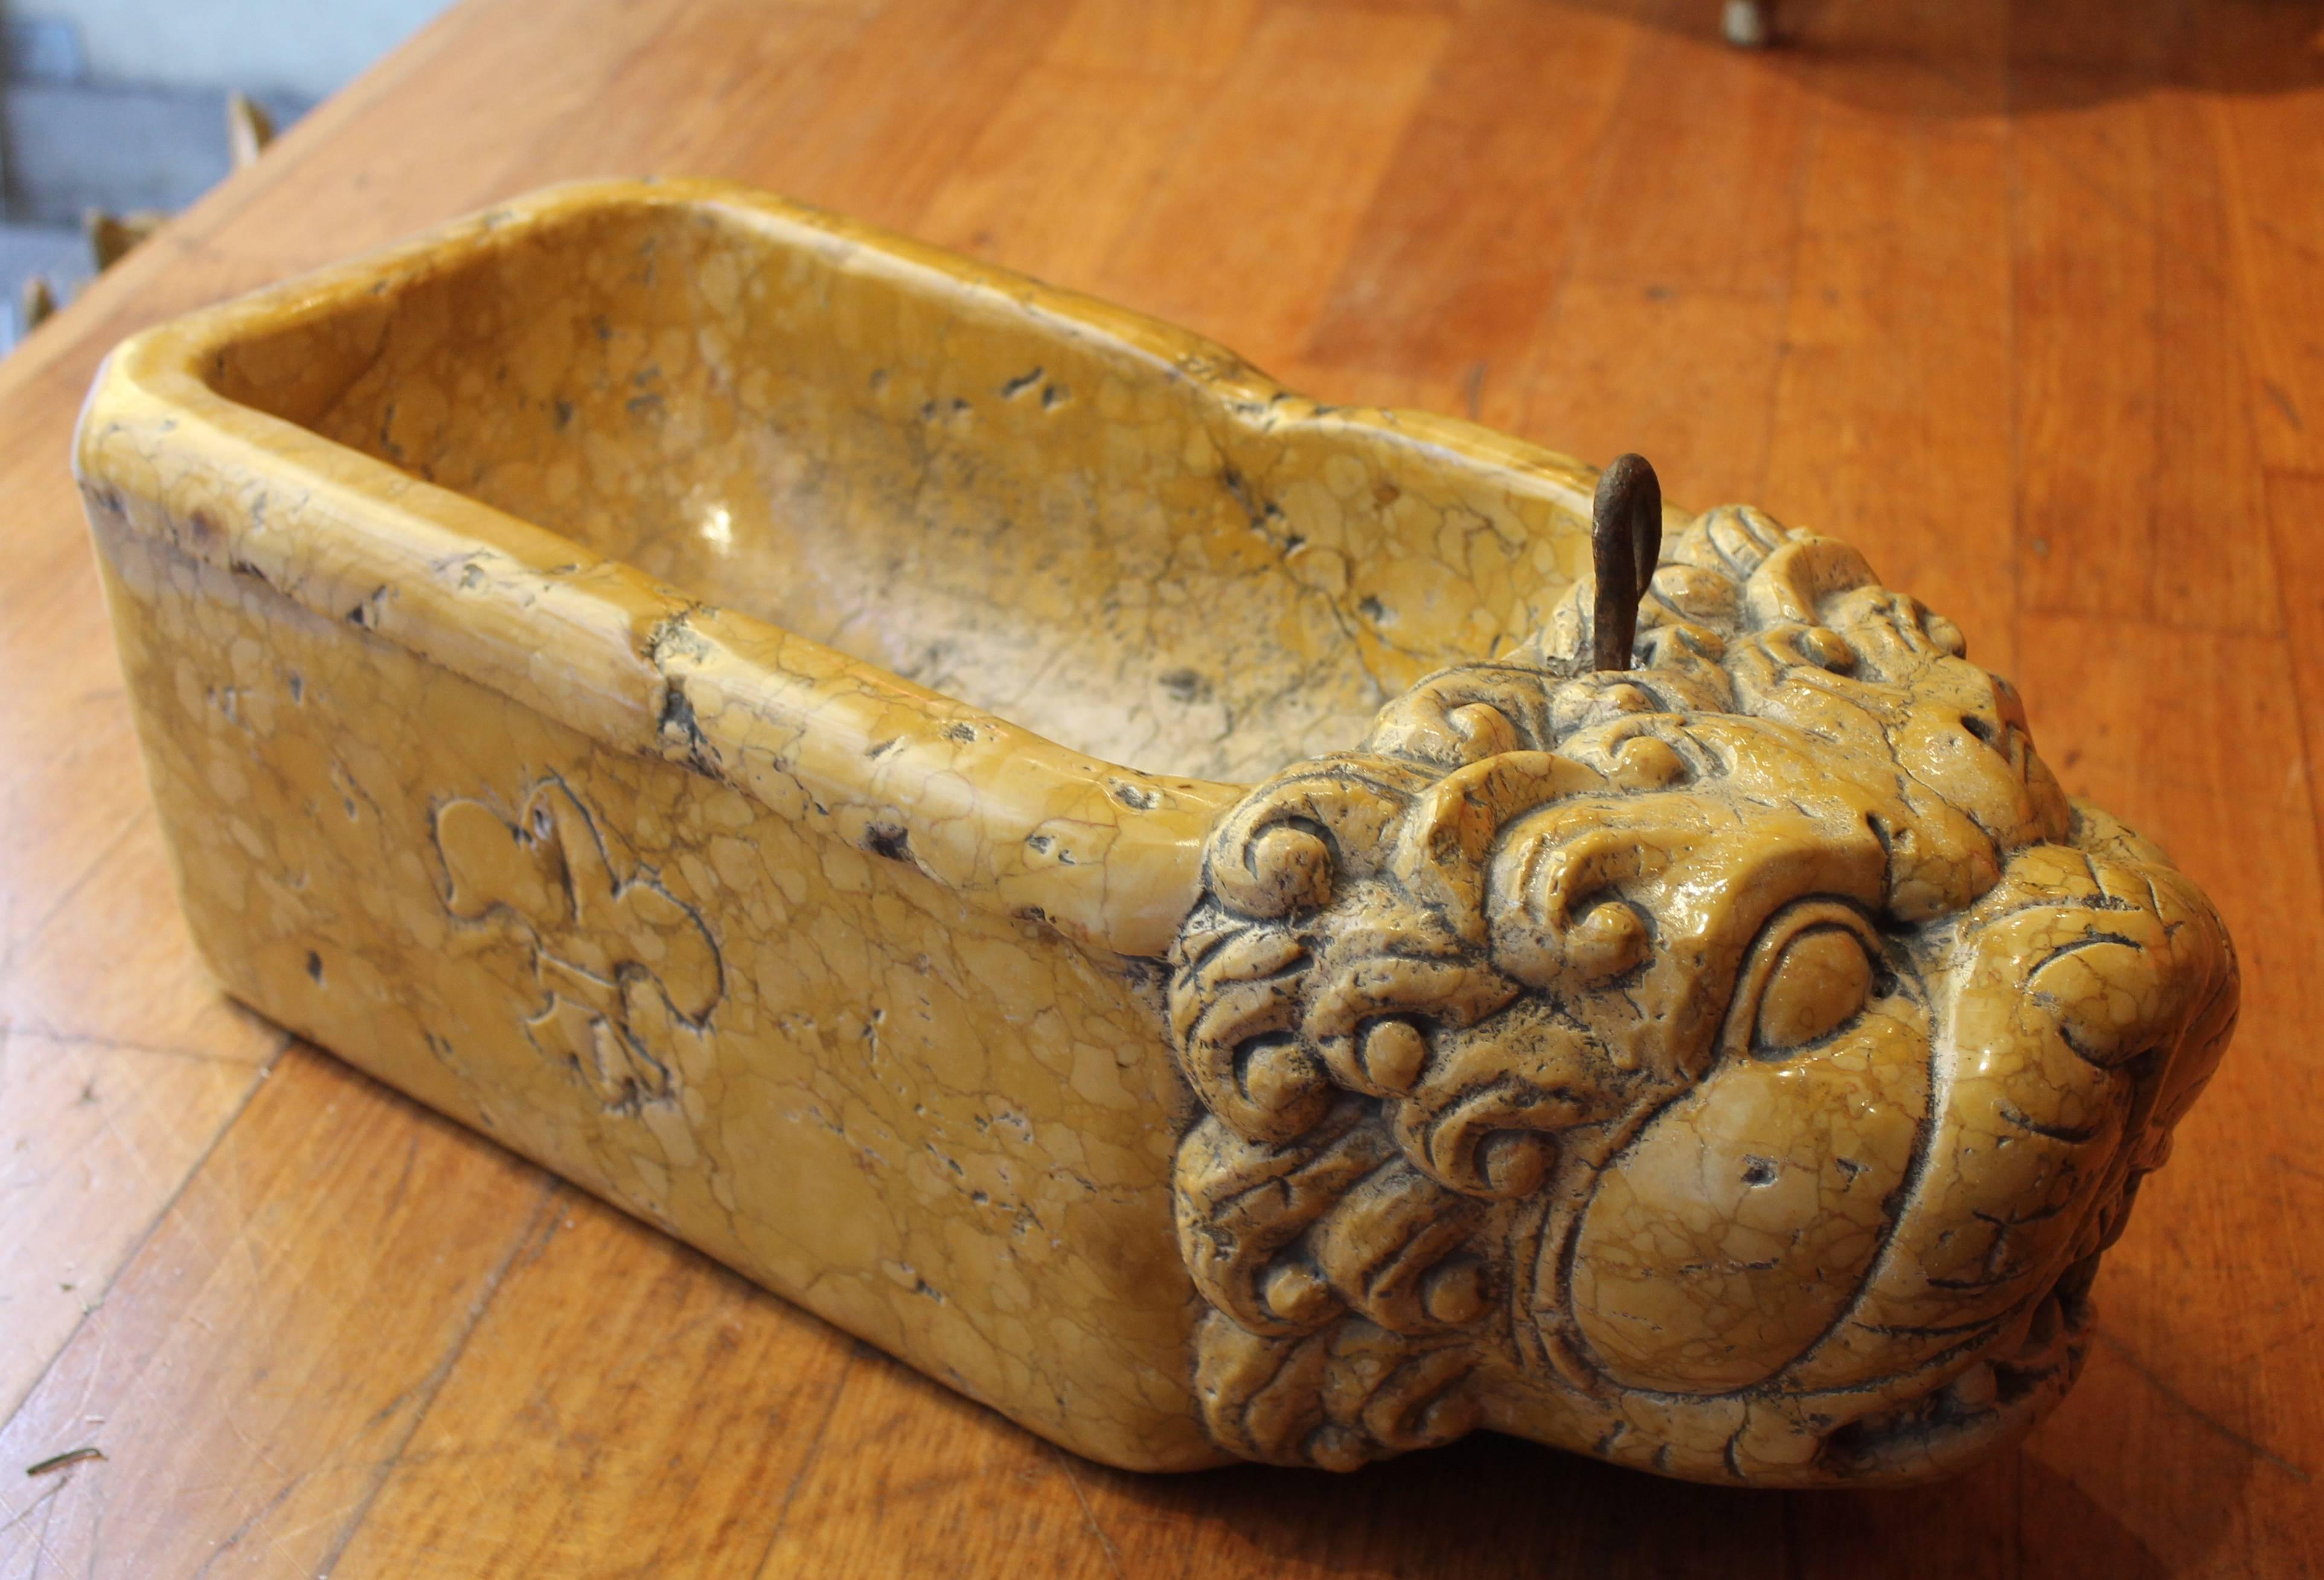 A late 18th Century wonderfully carved yellow Sienna marble fountain with lion head in beautifully aged condition. The lion has a highly articulate mane and a lively facial expression. A beautiful Fleur-de-lis, symbol of the city of Florence, is